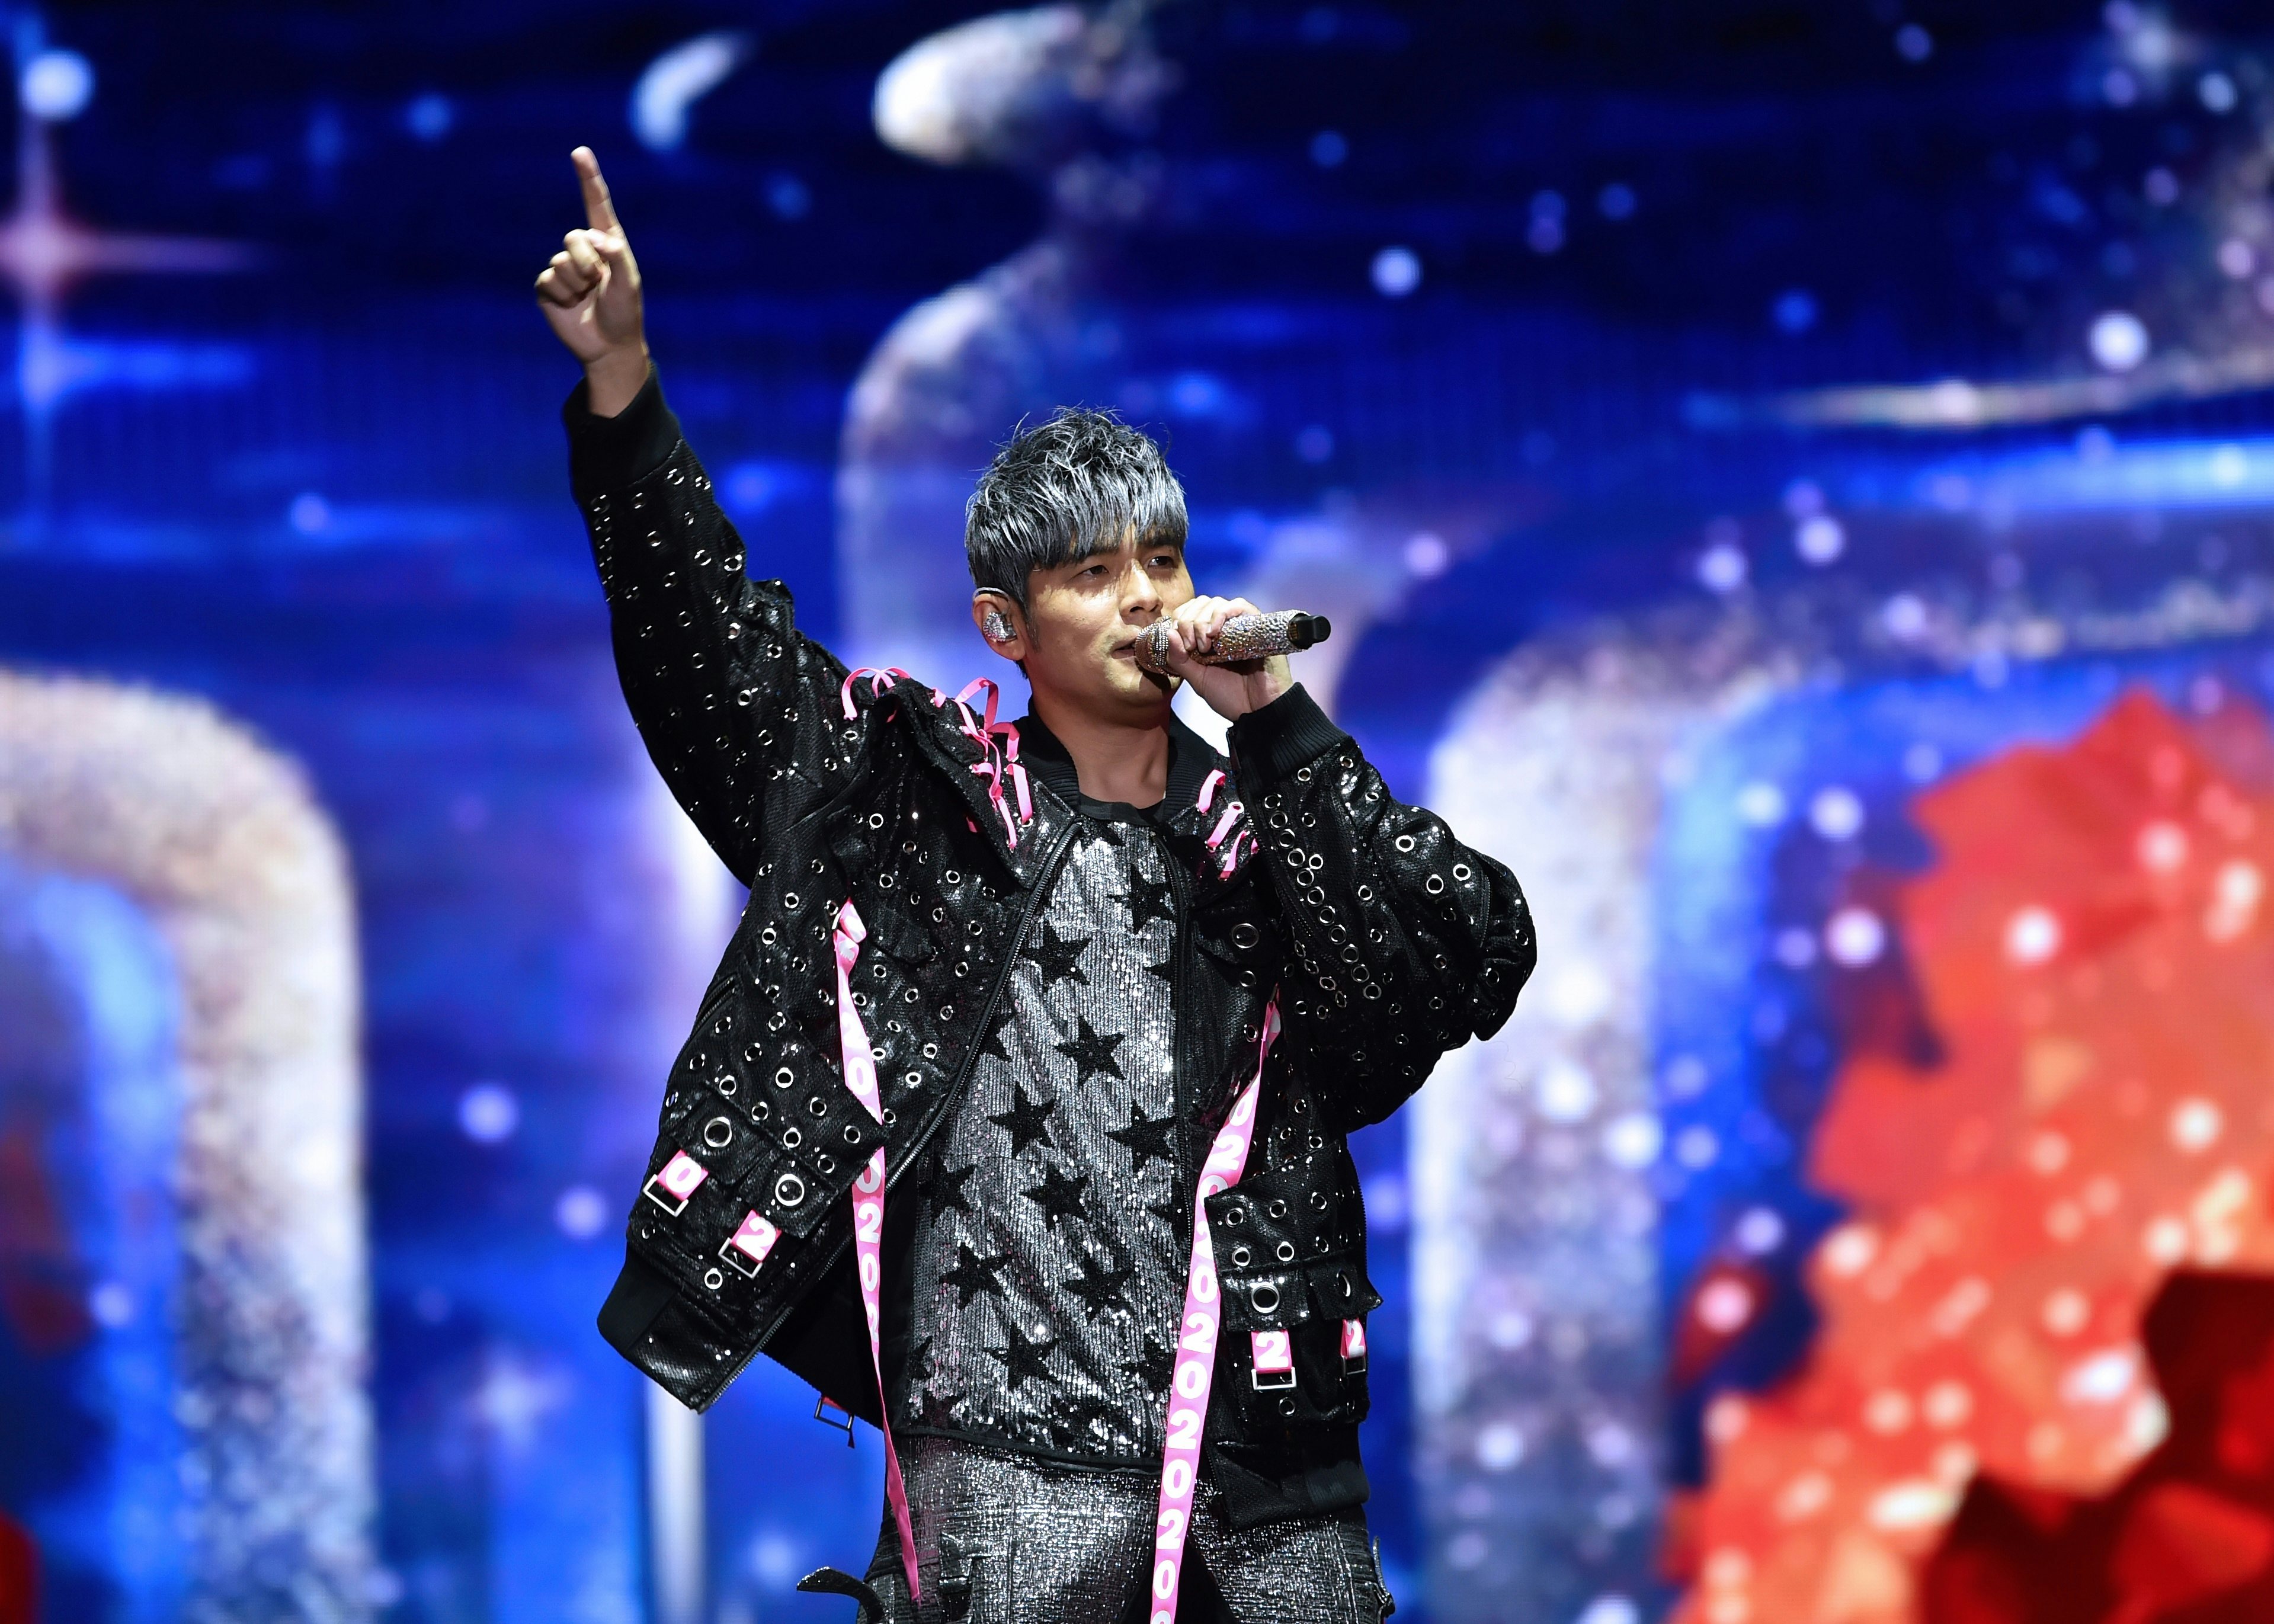 Jay Chou is one of China's stars who have ventured into streetwear, joining Jackson Wang's Team Wang. Photo: Getty Images